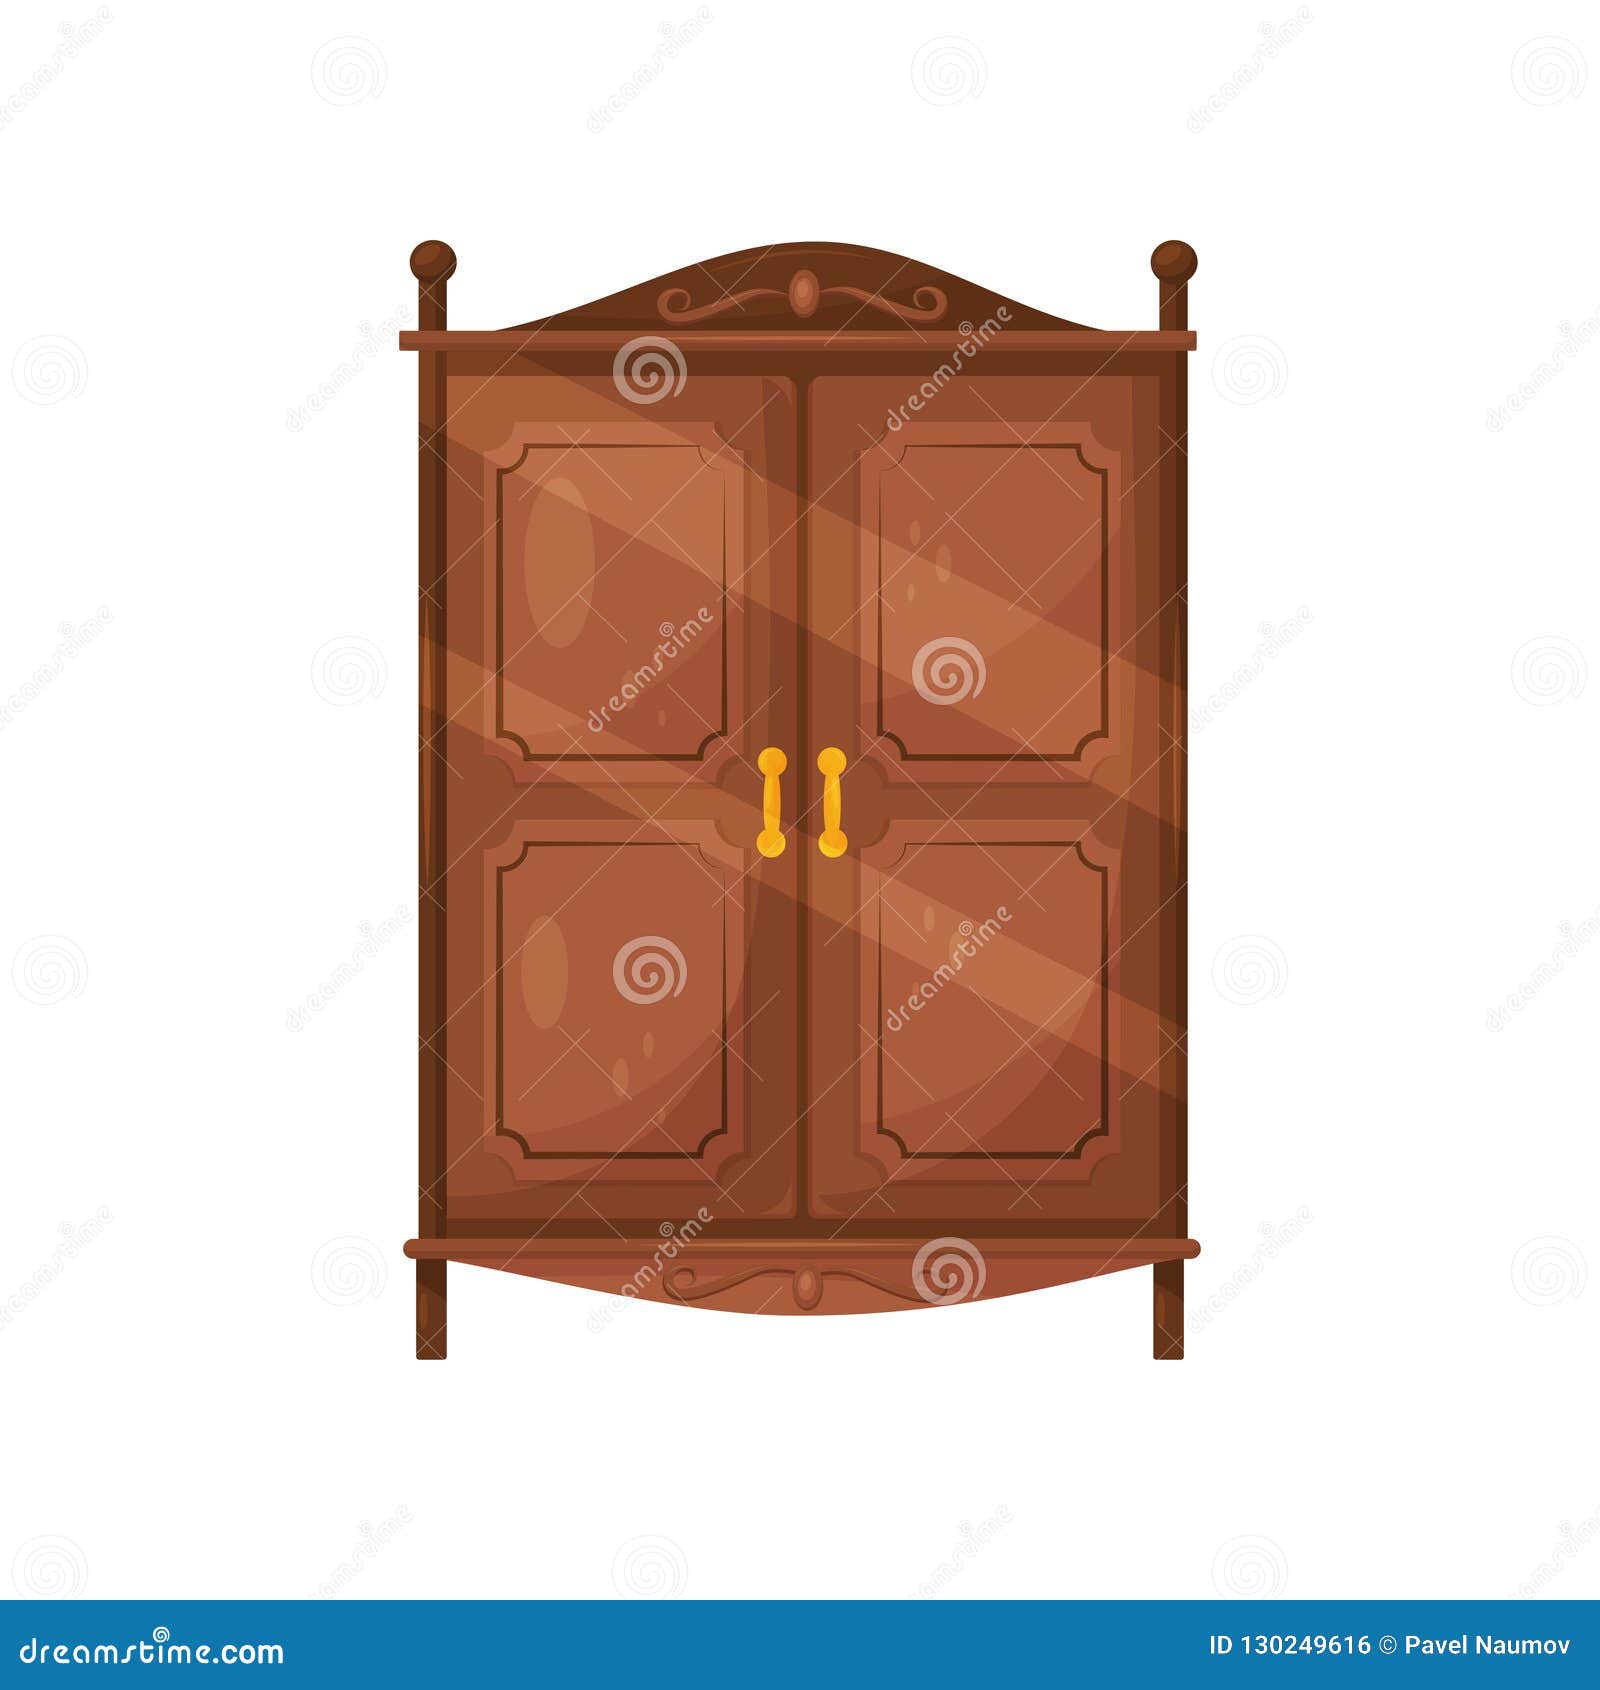 flat  icon of vintage wooden cabinet with golden handles. classic furniture for bedroom. brown cupboard